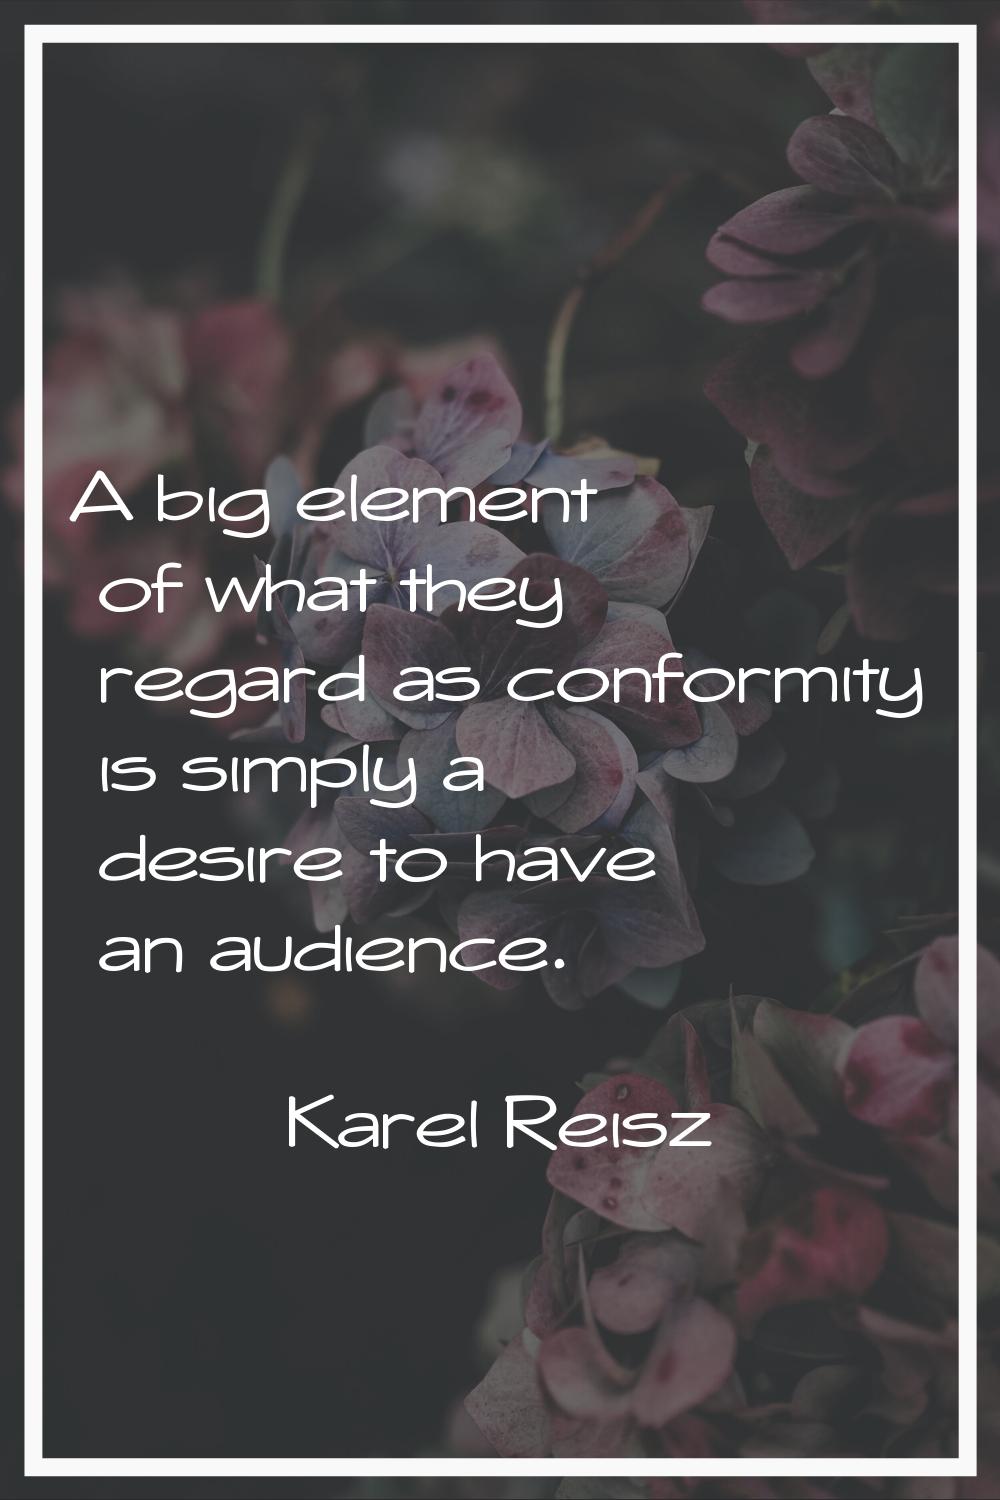 A big element of what they regard as conformity is simply a desire to have an audience.